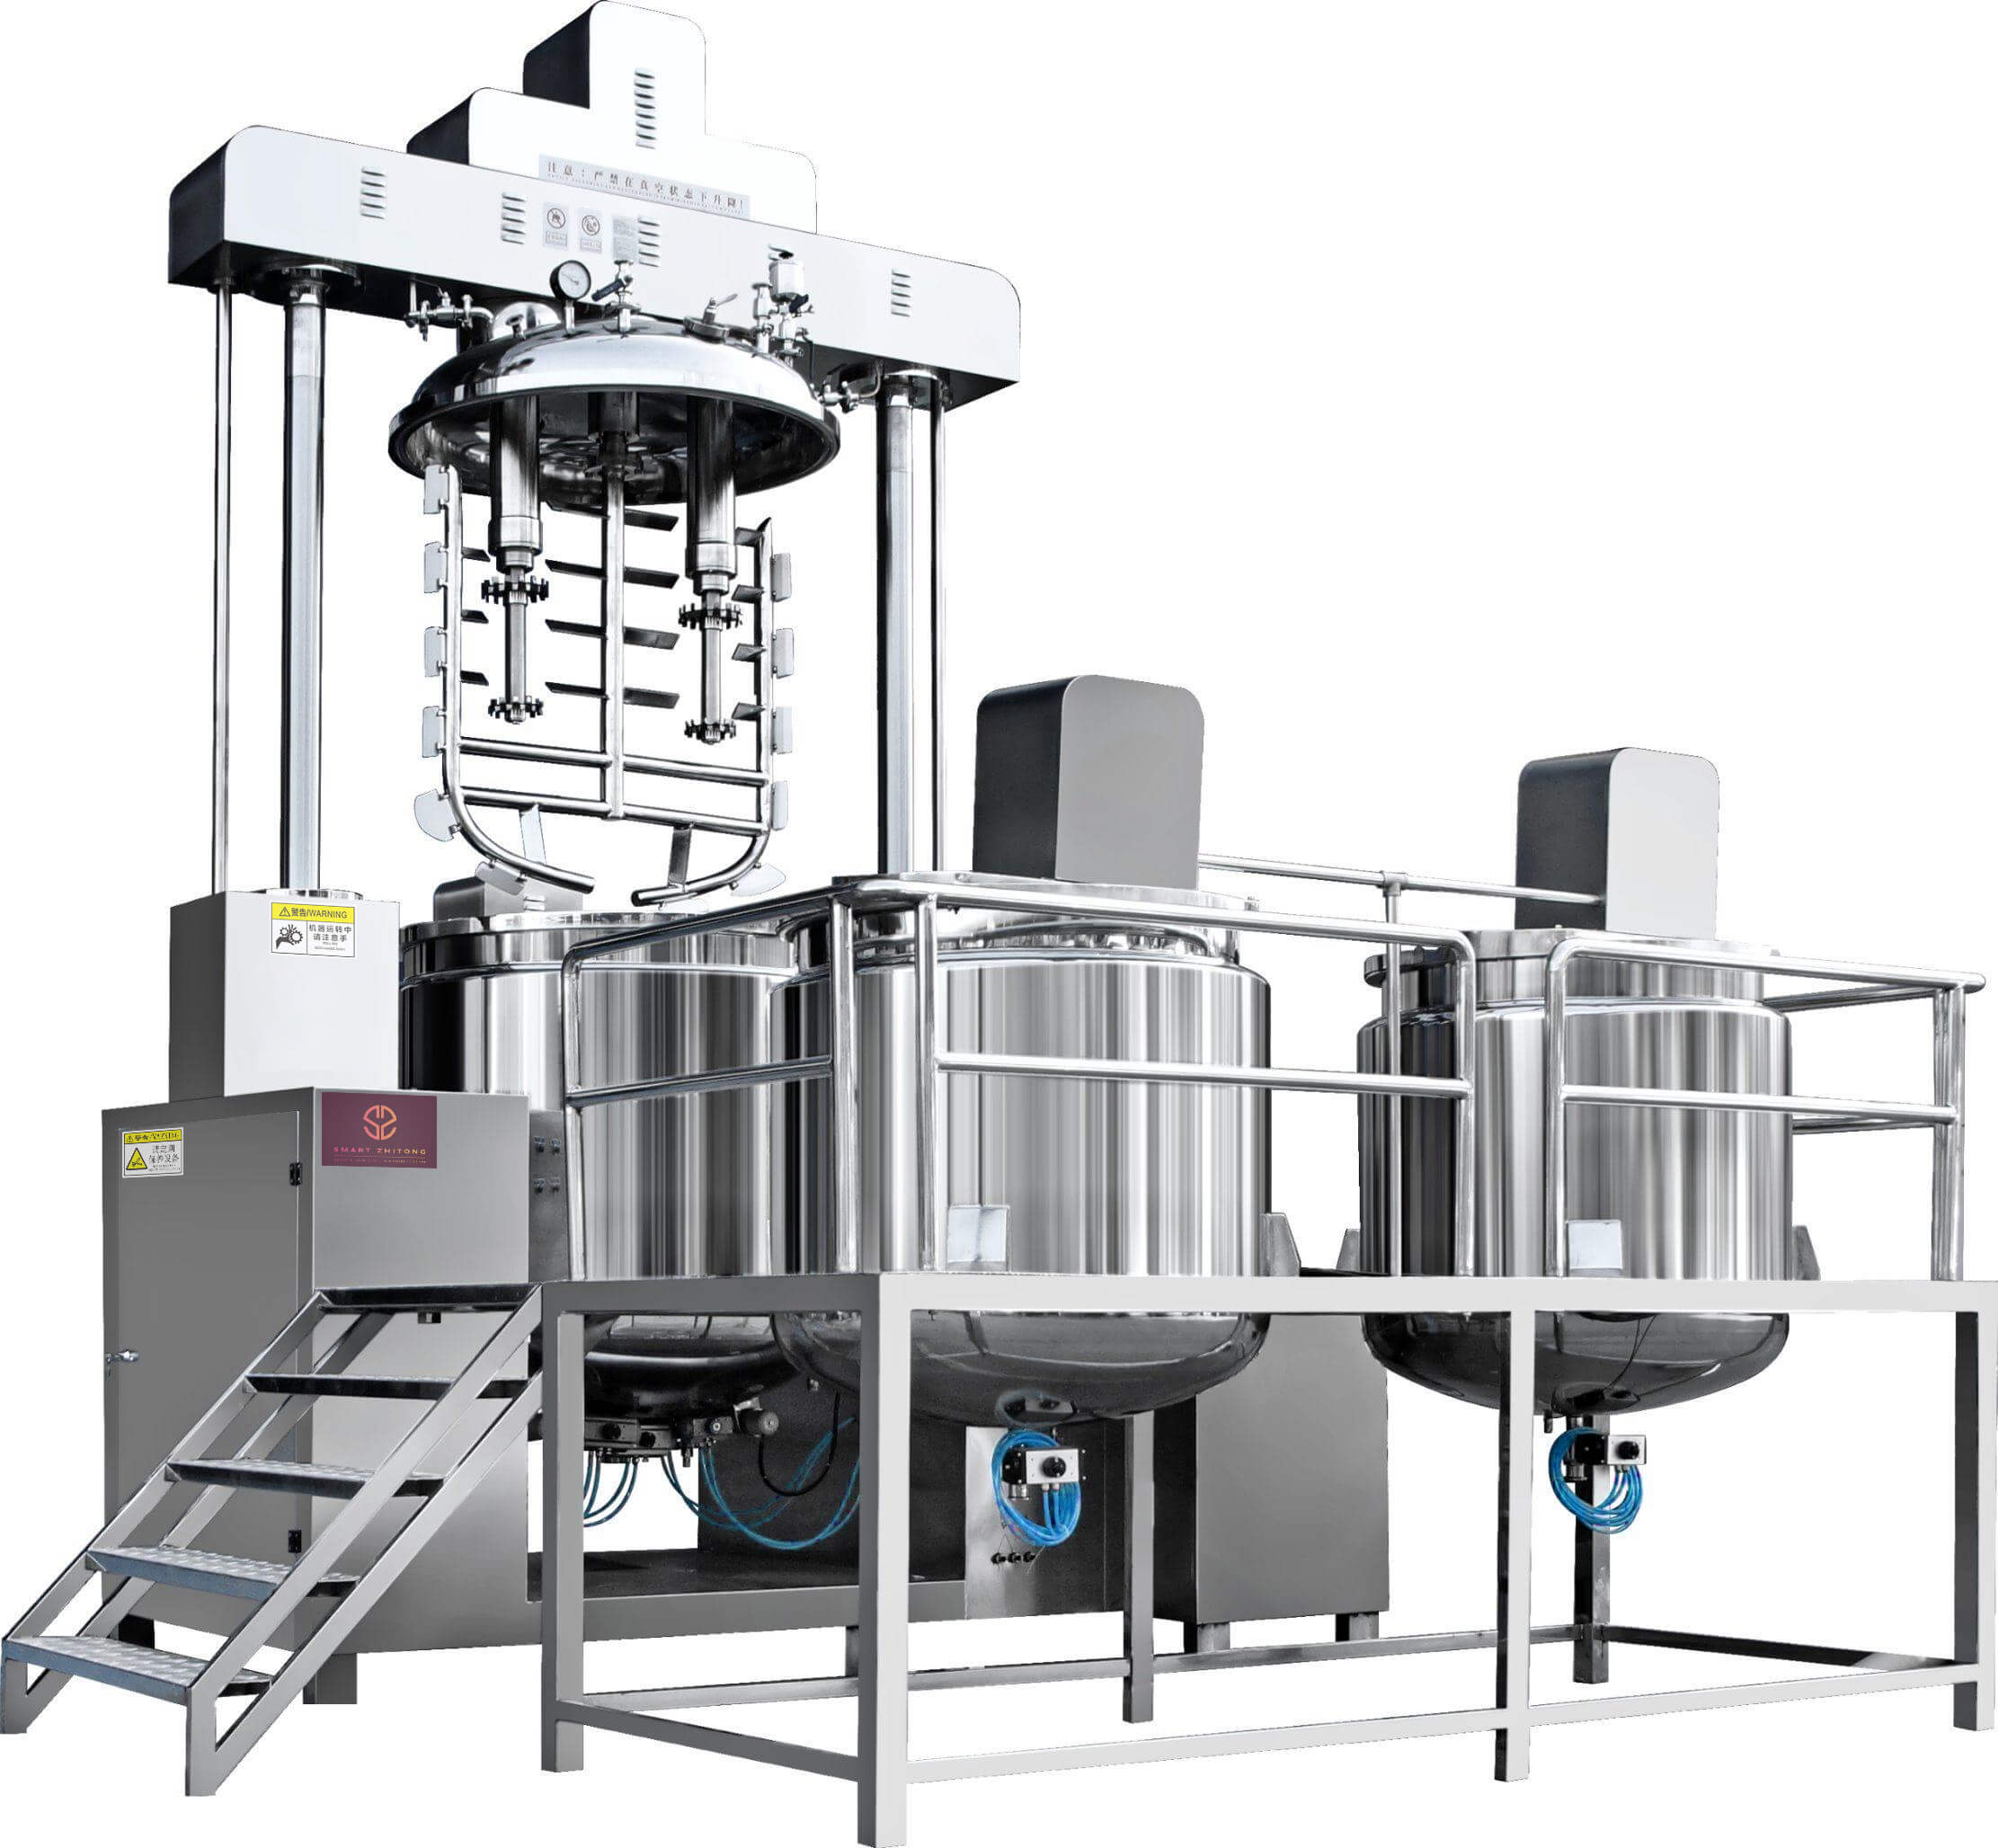 Cartoning Equipment Explained: Your Guide to Packaging Machinery | Packaging World